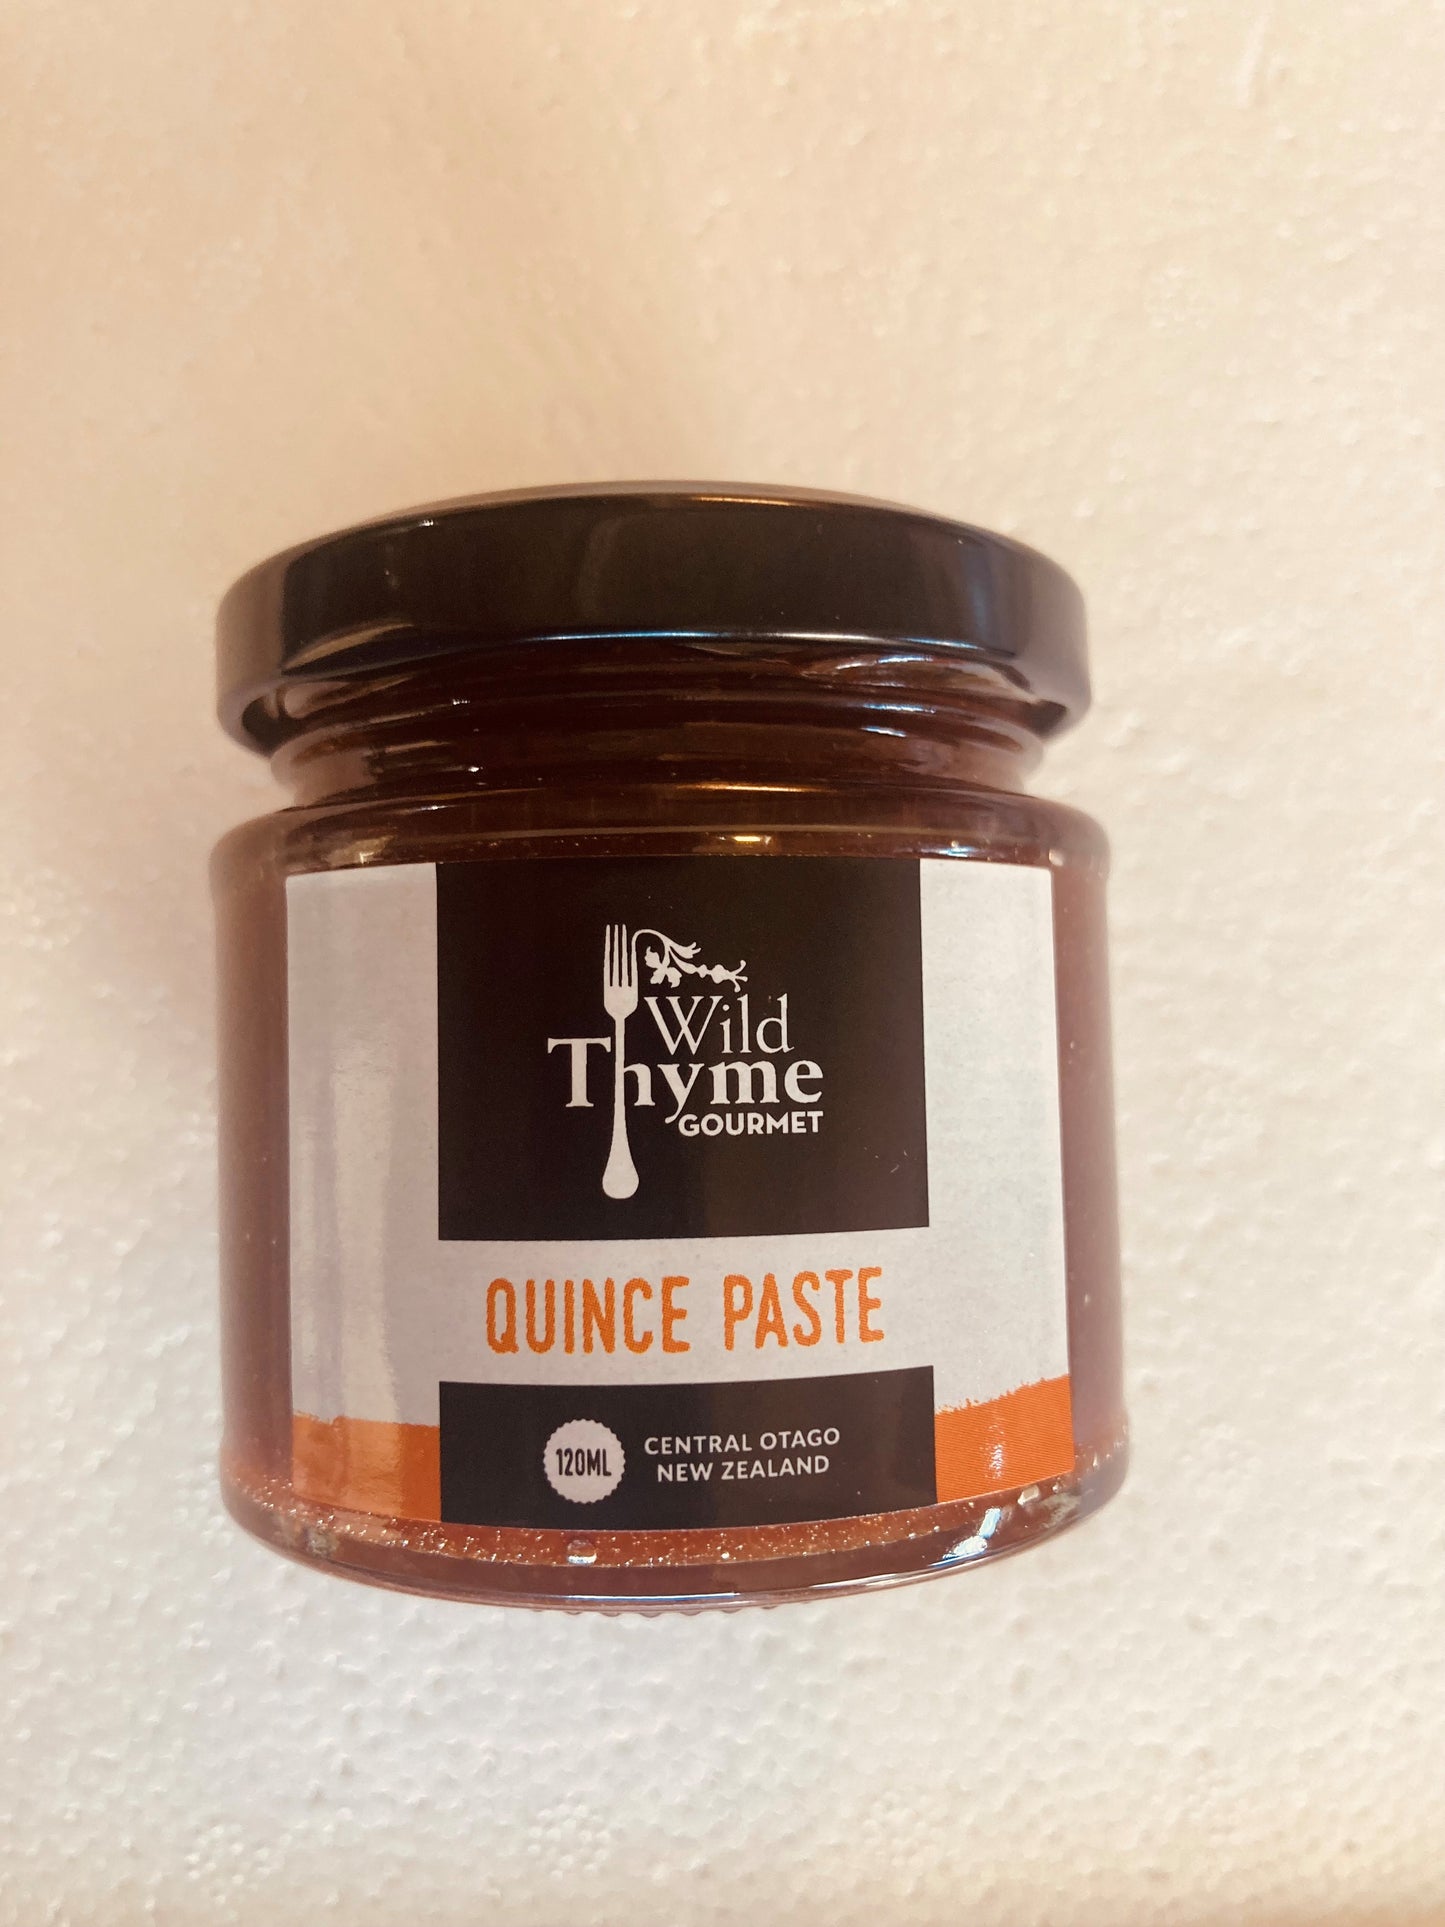 Wild Thyme Gourmet Quince Paste 120ml